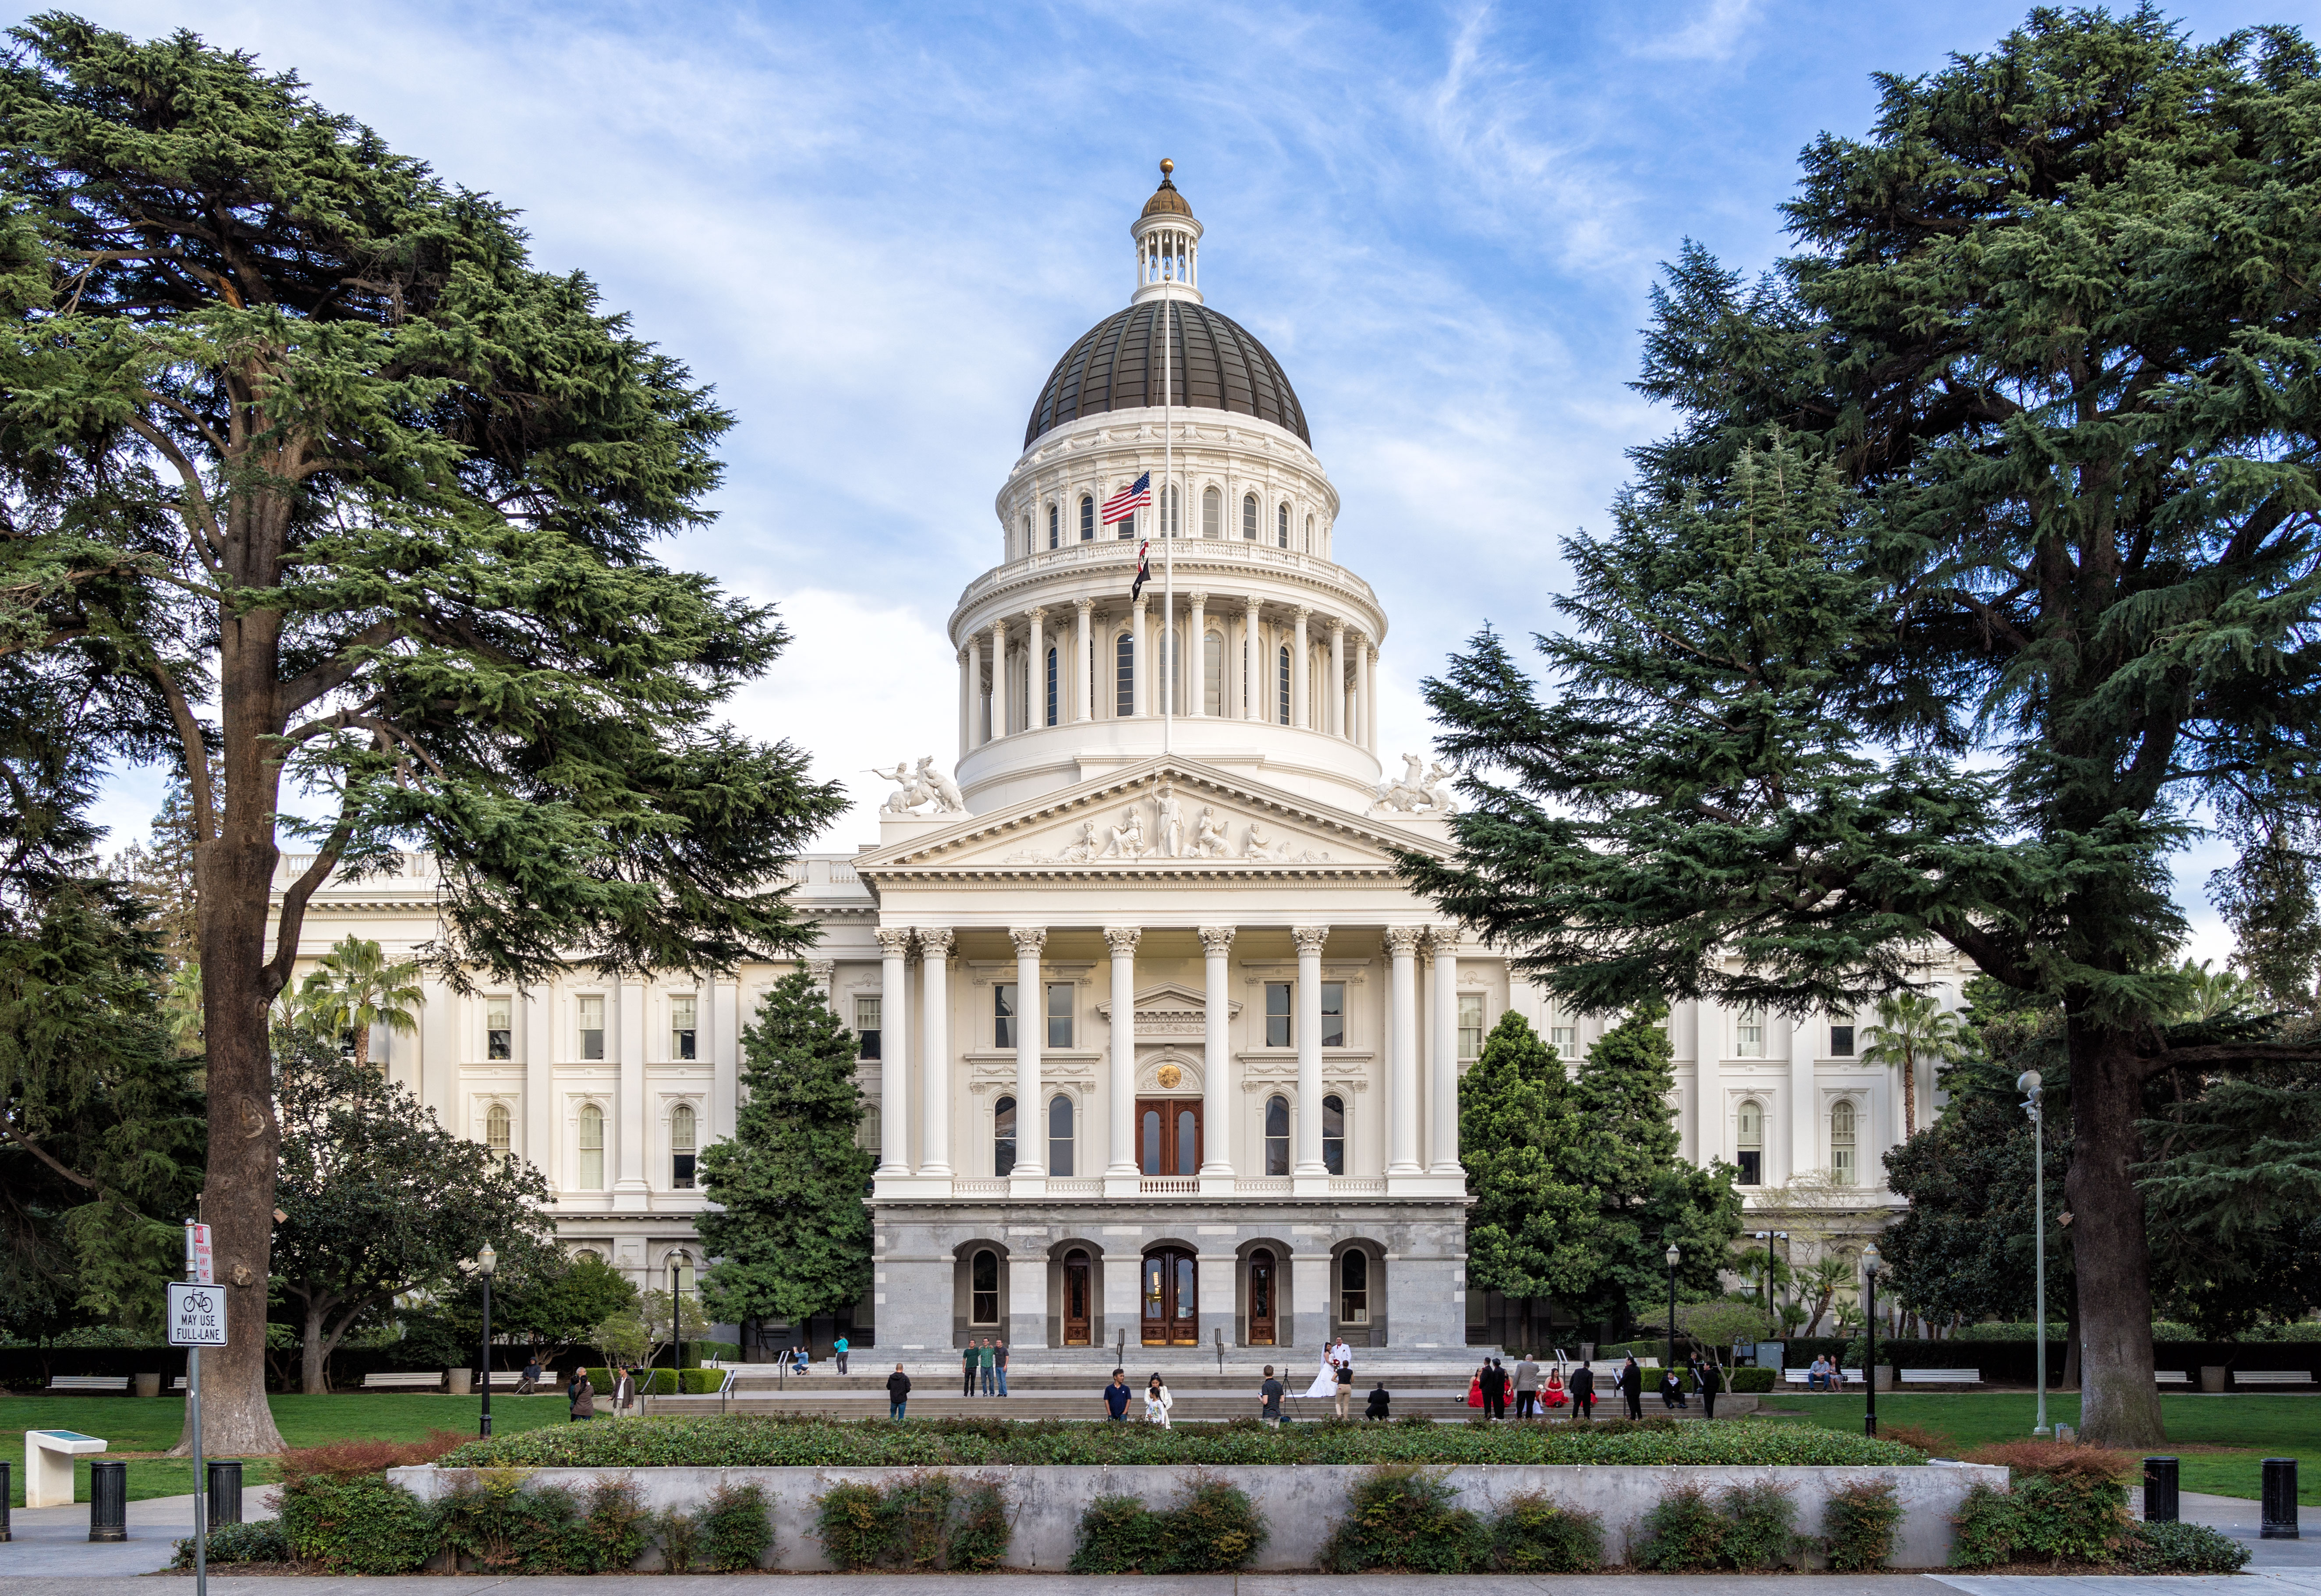 California reparations task force opens two-day public hearing